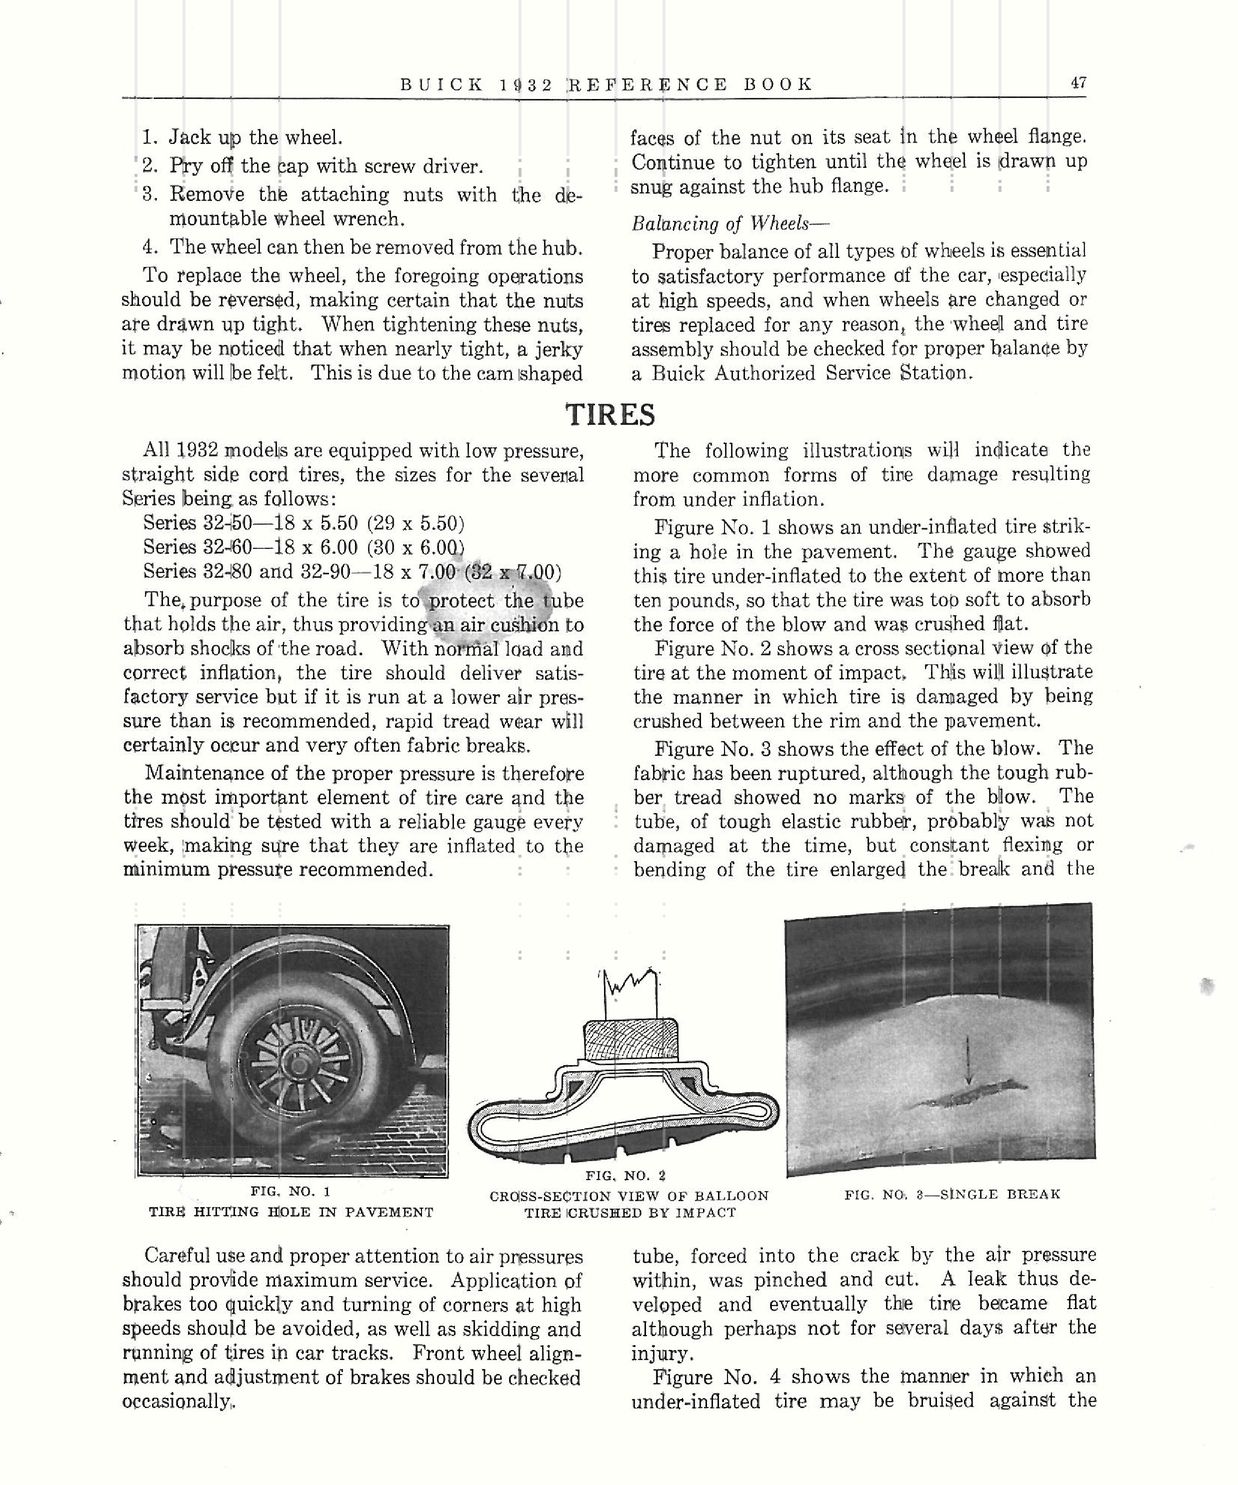 n_1932 Buick Reference Book-47.jpg